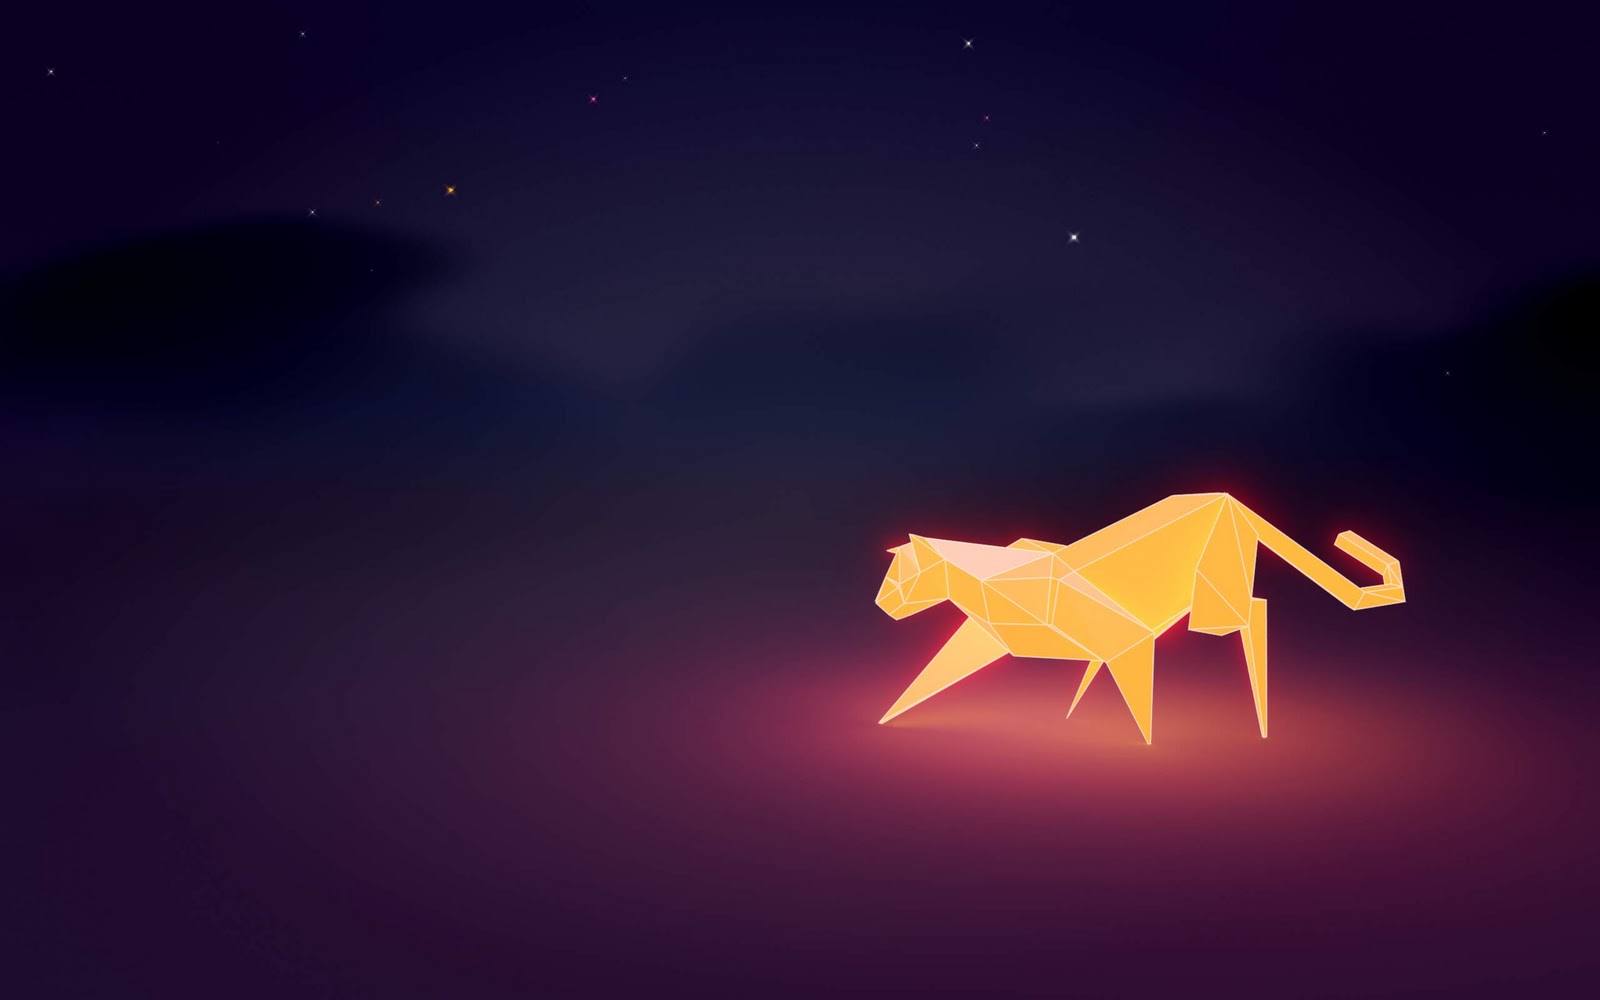 New Set Of 14 Wallpapers For Ubuntu 11 10 Is Perhaps The Best Collection Yet